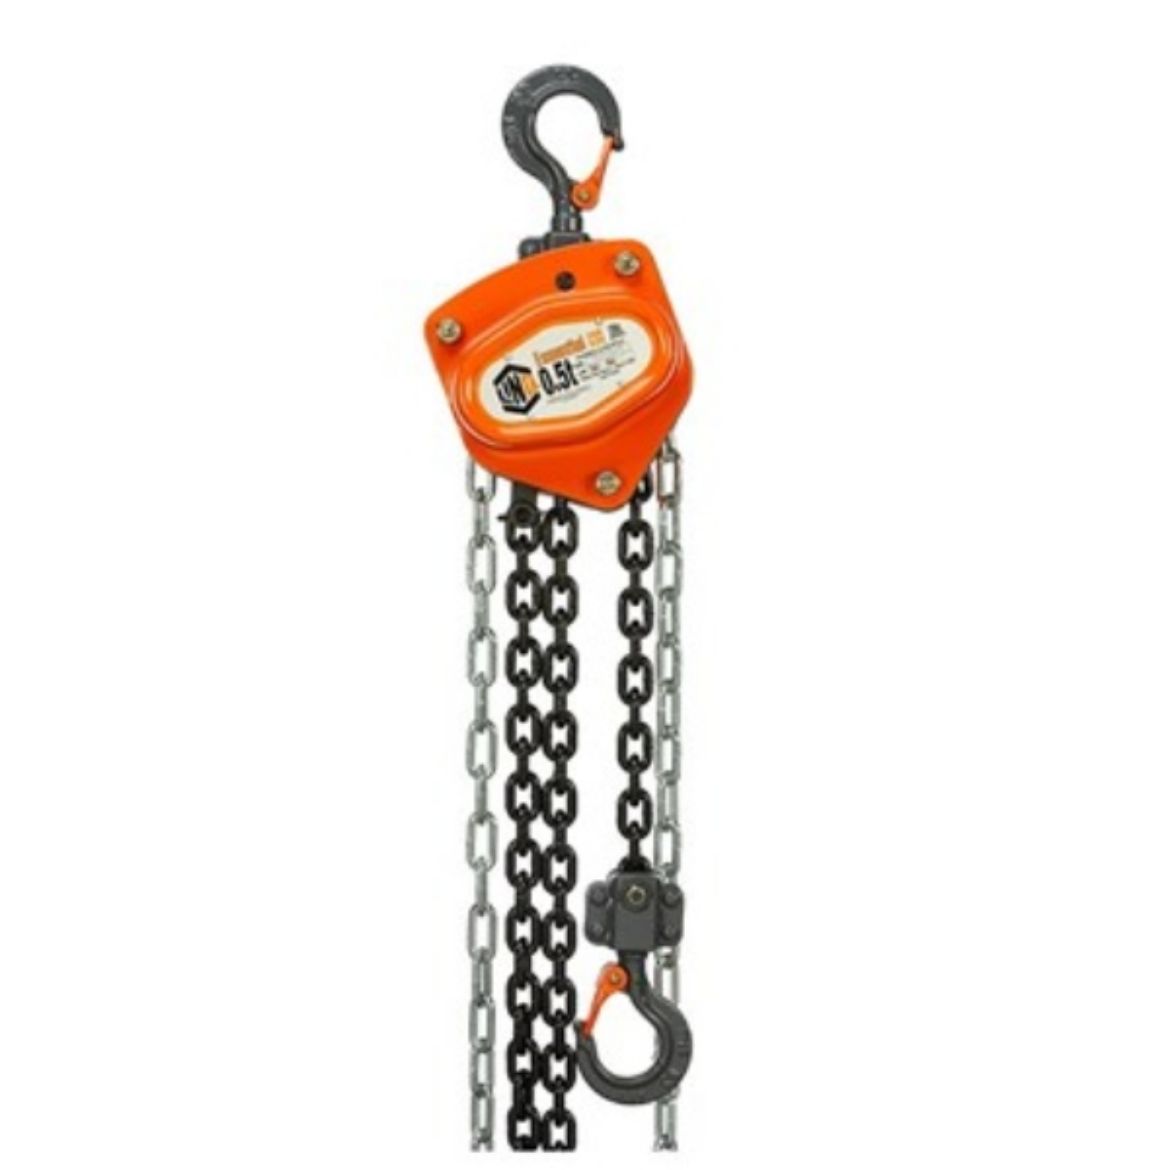 Picture of LINQ CHAIN BLOCK ESSENTIAL 0.5 TONNE CAPACITY 3M LONG COMMERCIAL